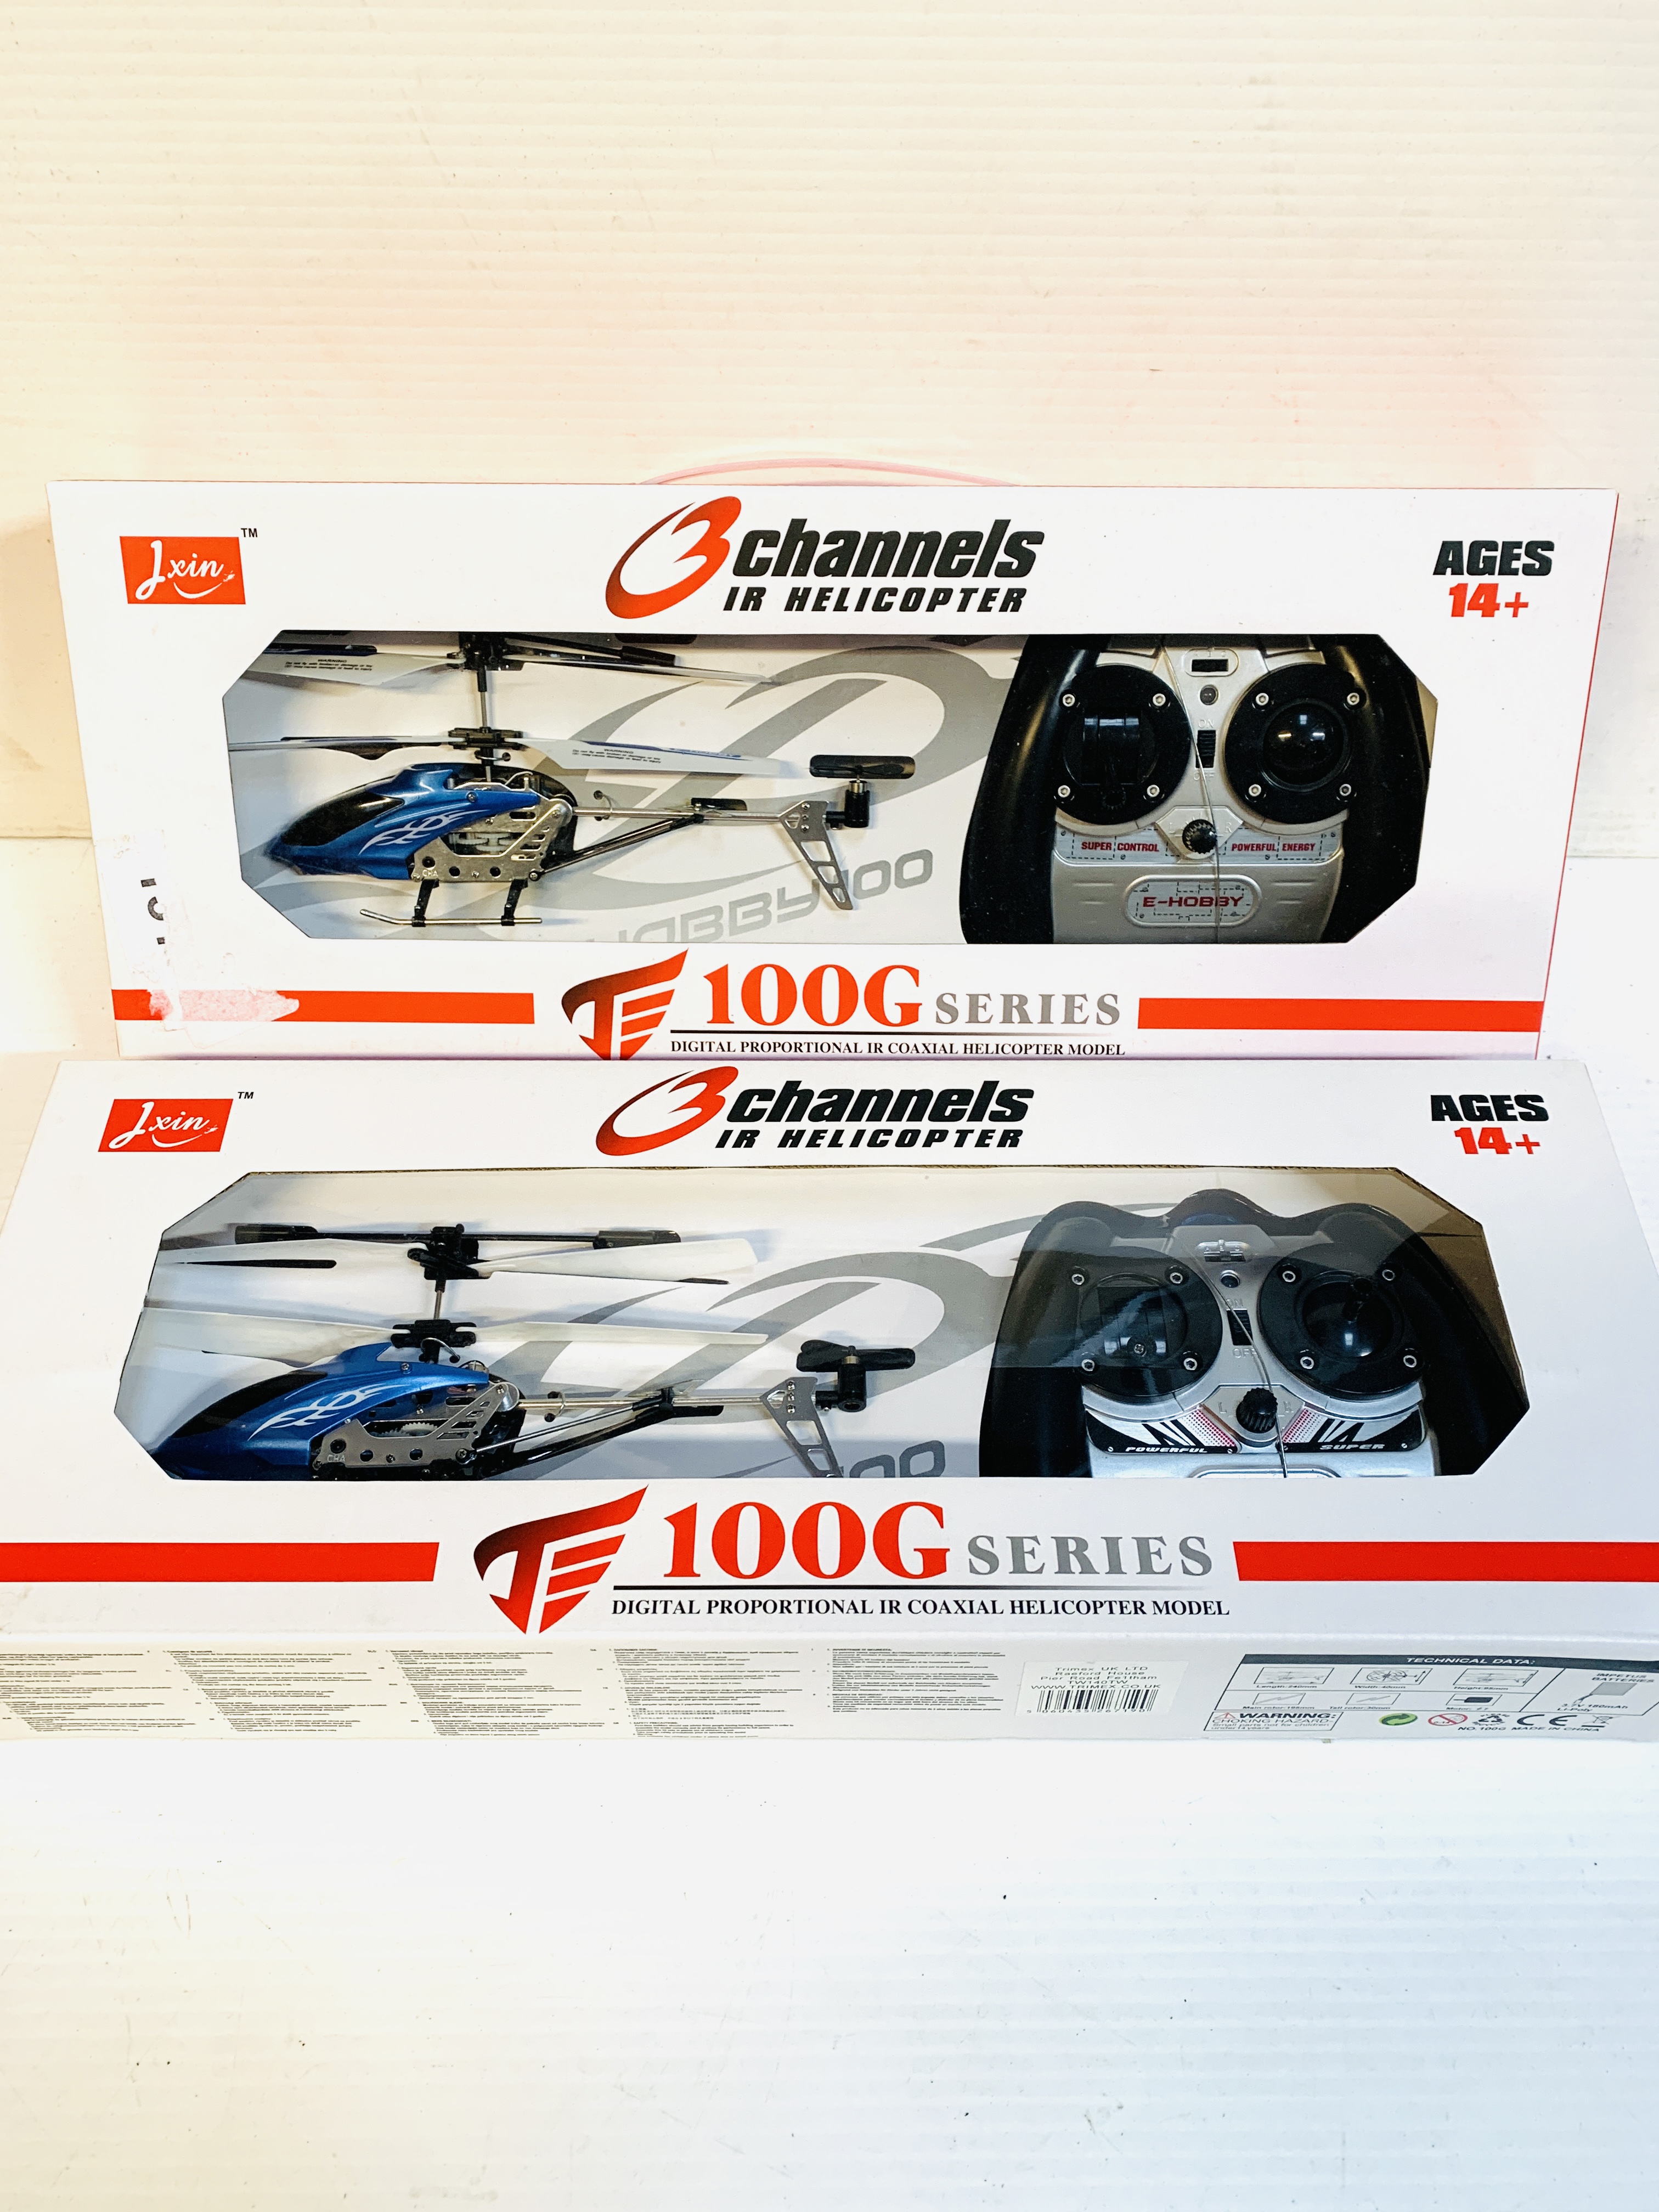 Two boxed 3 channels IR helicopters 100G series